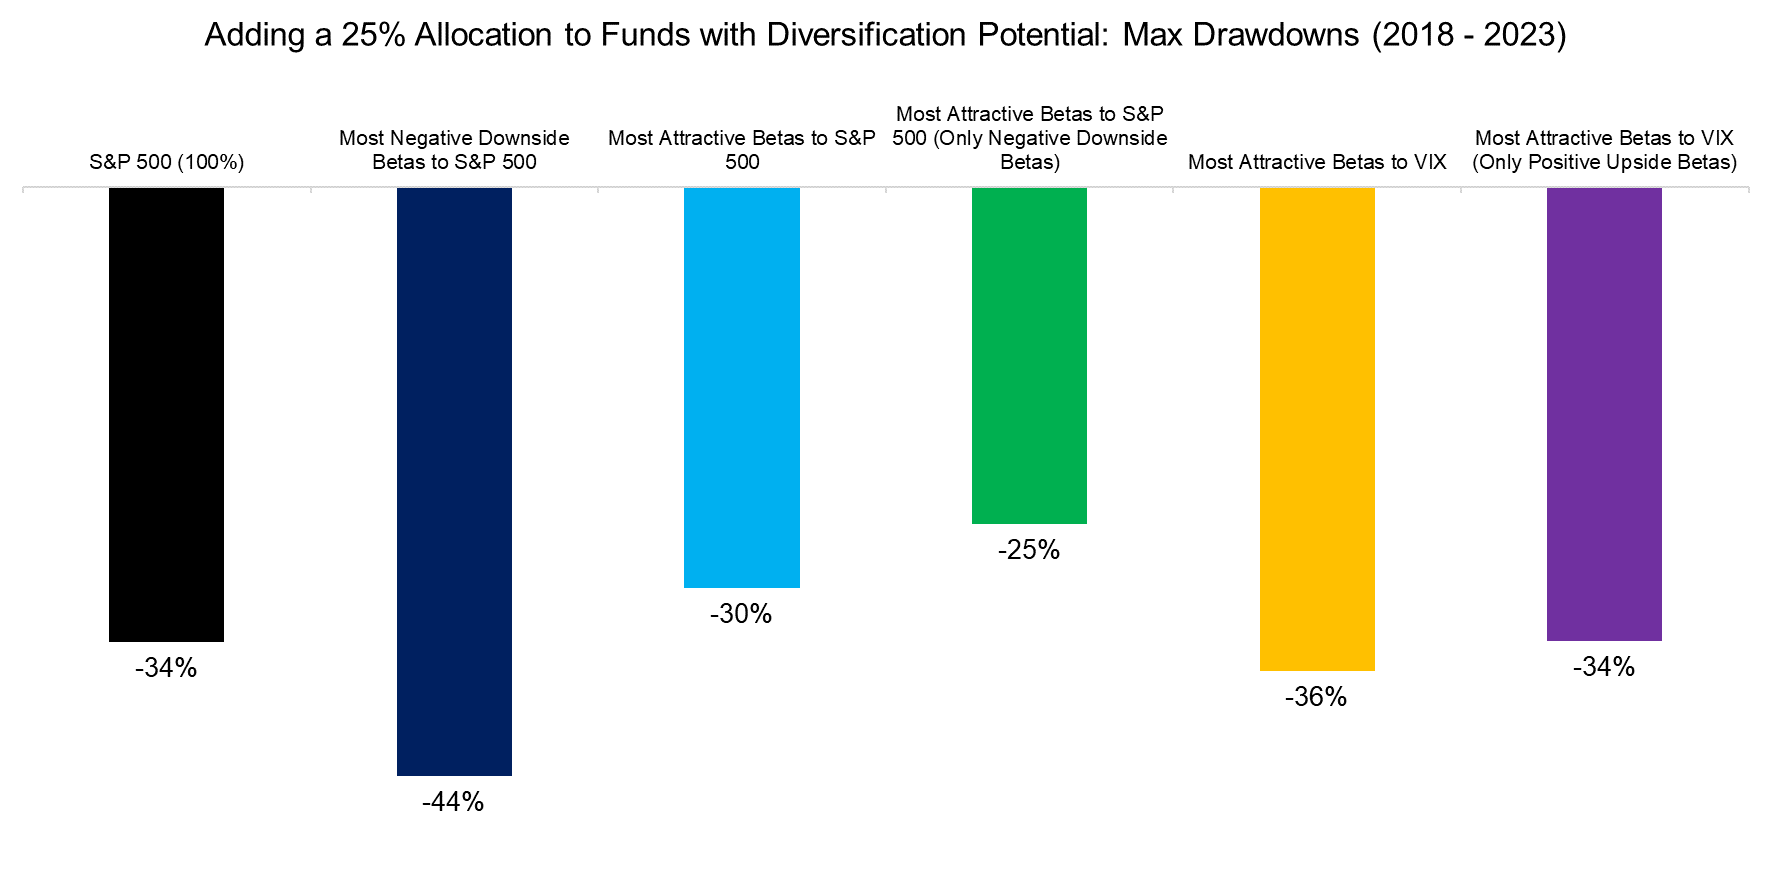 Adding a 25% Allocation to Funds with Diversification Potential Max Drawdowns (2018 - 2023)